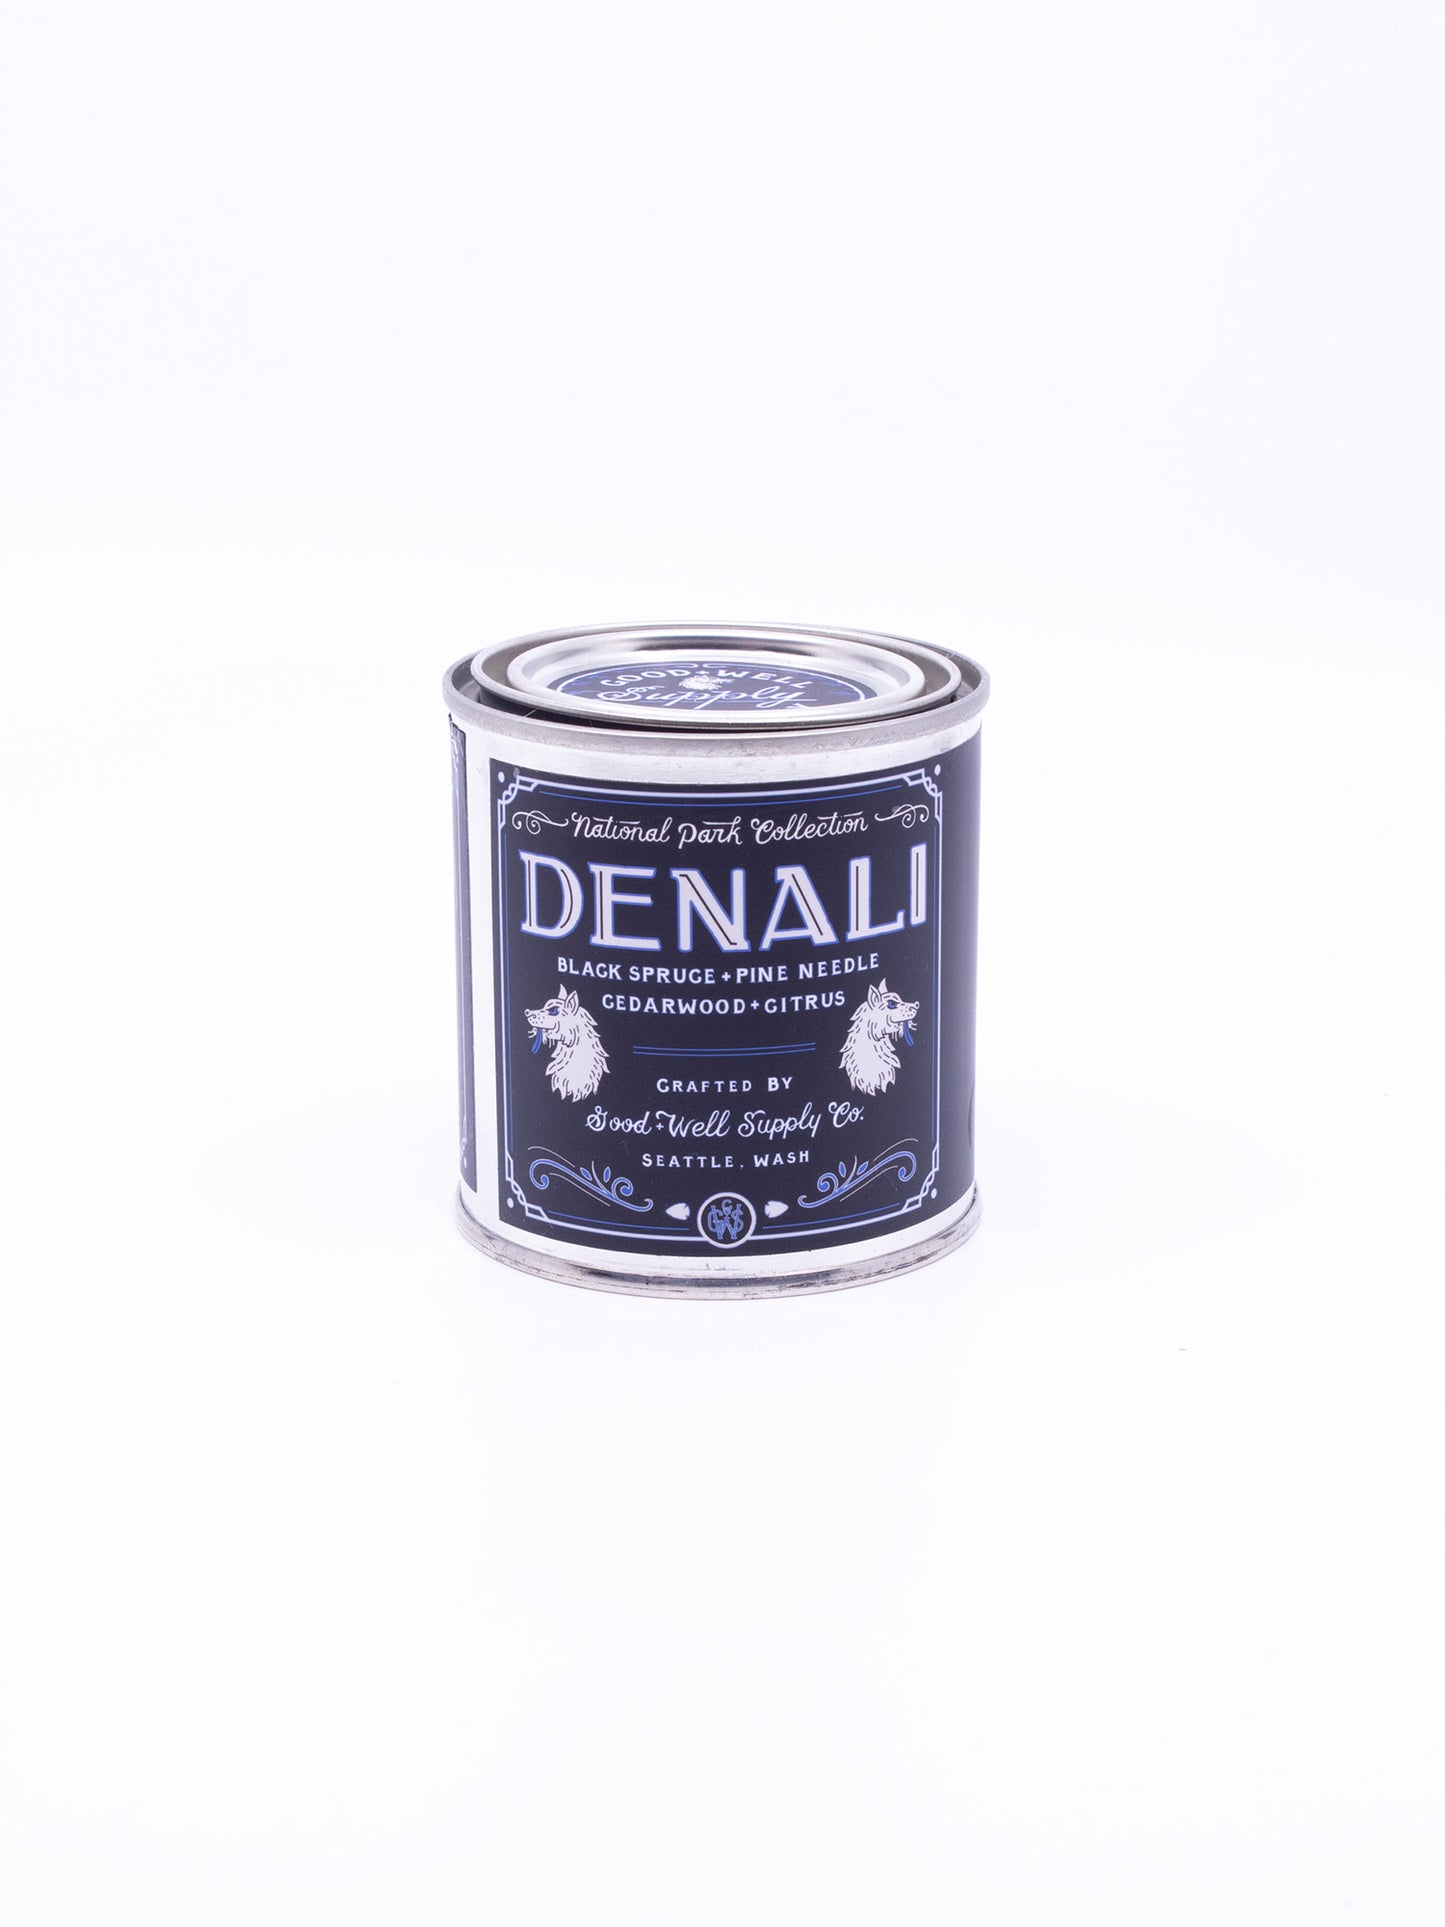 Good and Well Supply Co. Half Pint National Park Candle Denali